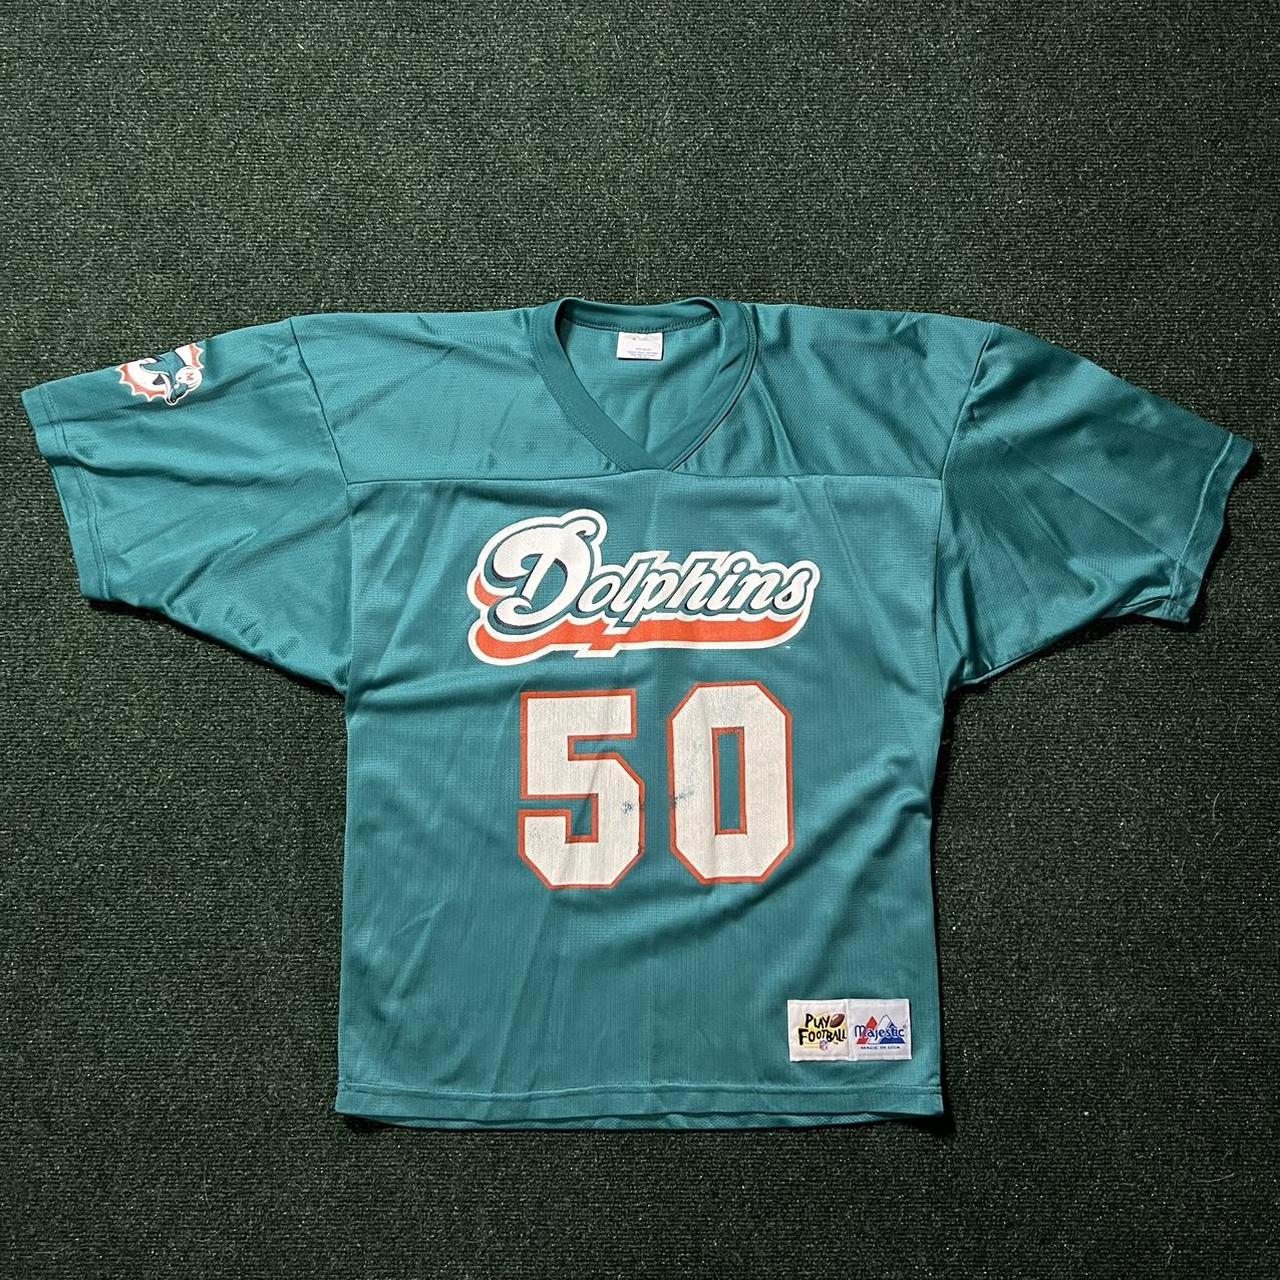 Vintage Miami Dolphins Jersey, Majestic Tag, Made in